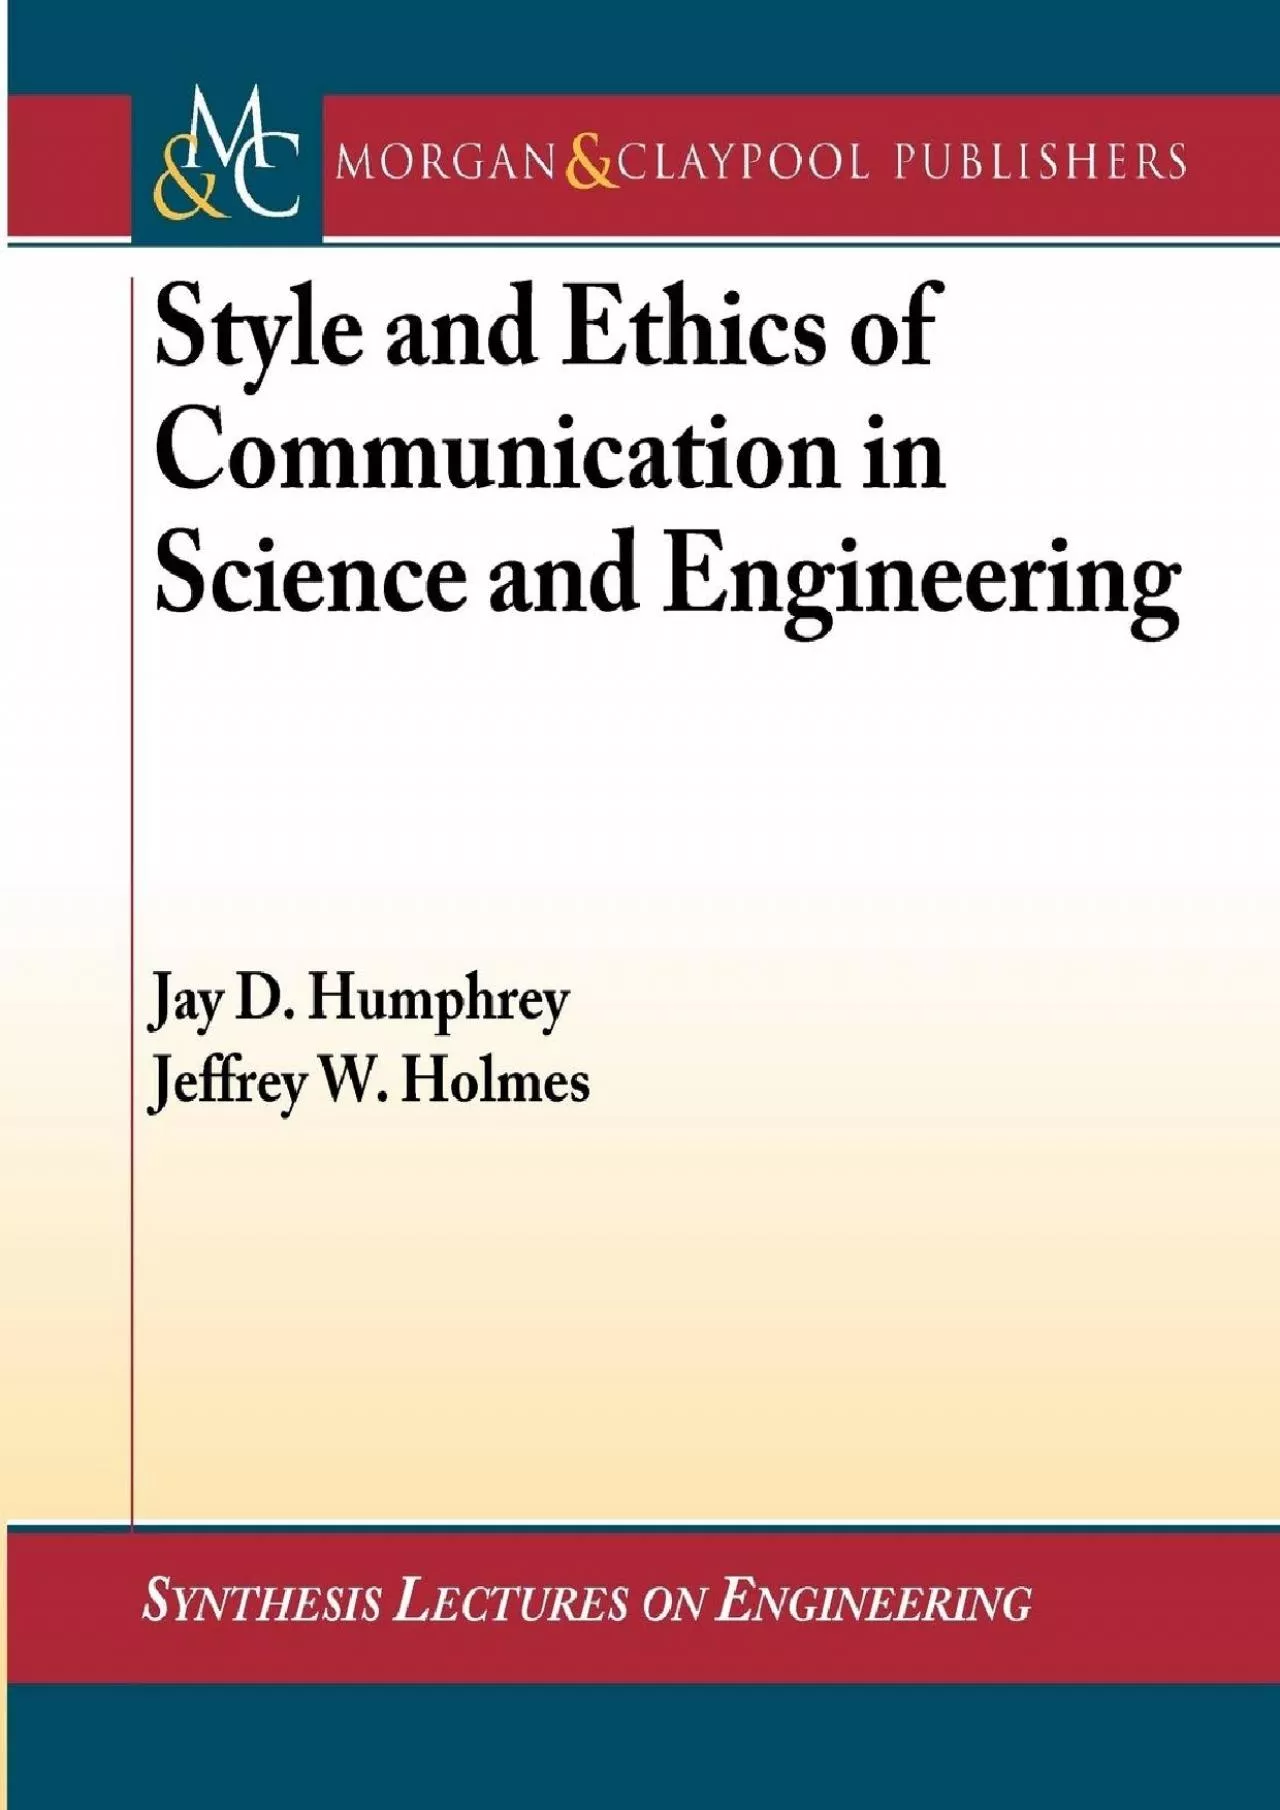 (EBOOK)-Style and Ethics of Communication in Science and Engineering (Synthesis Lectures